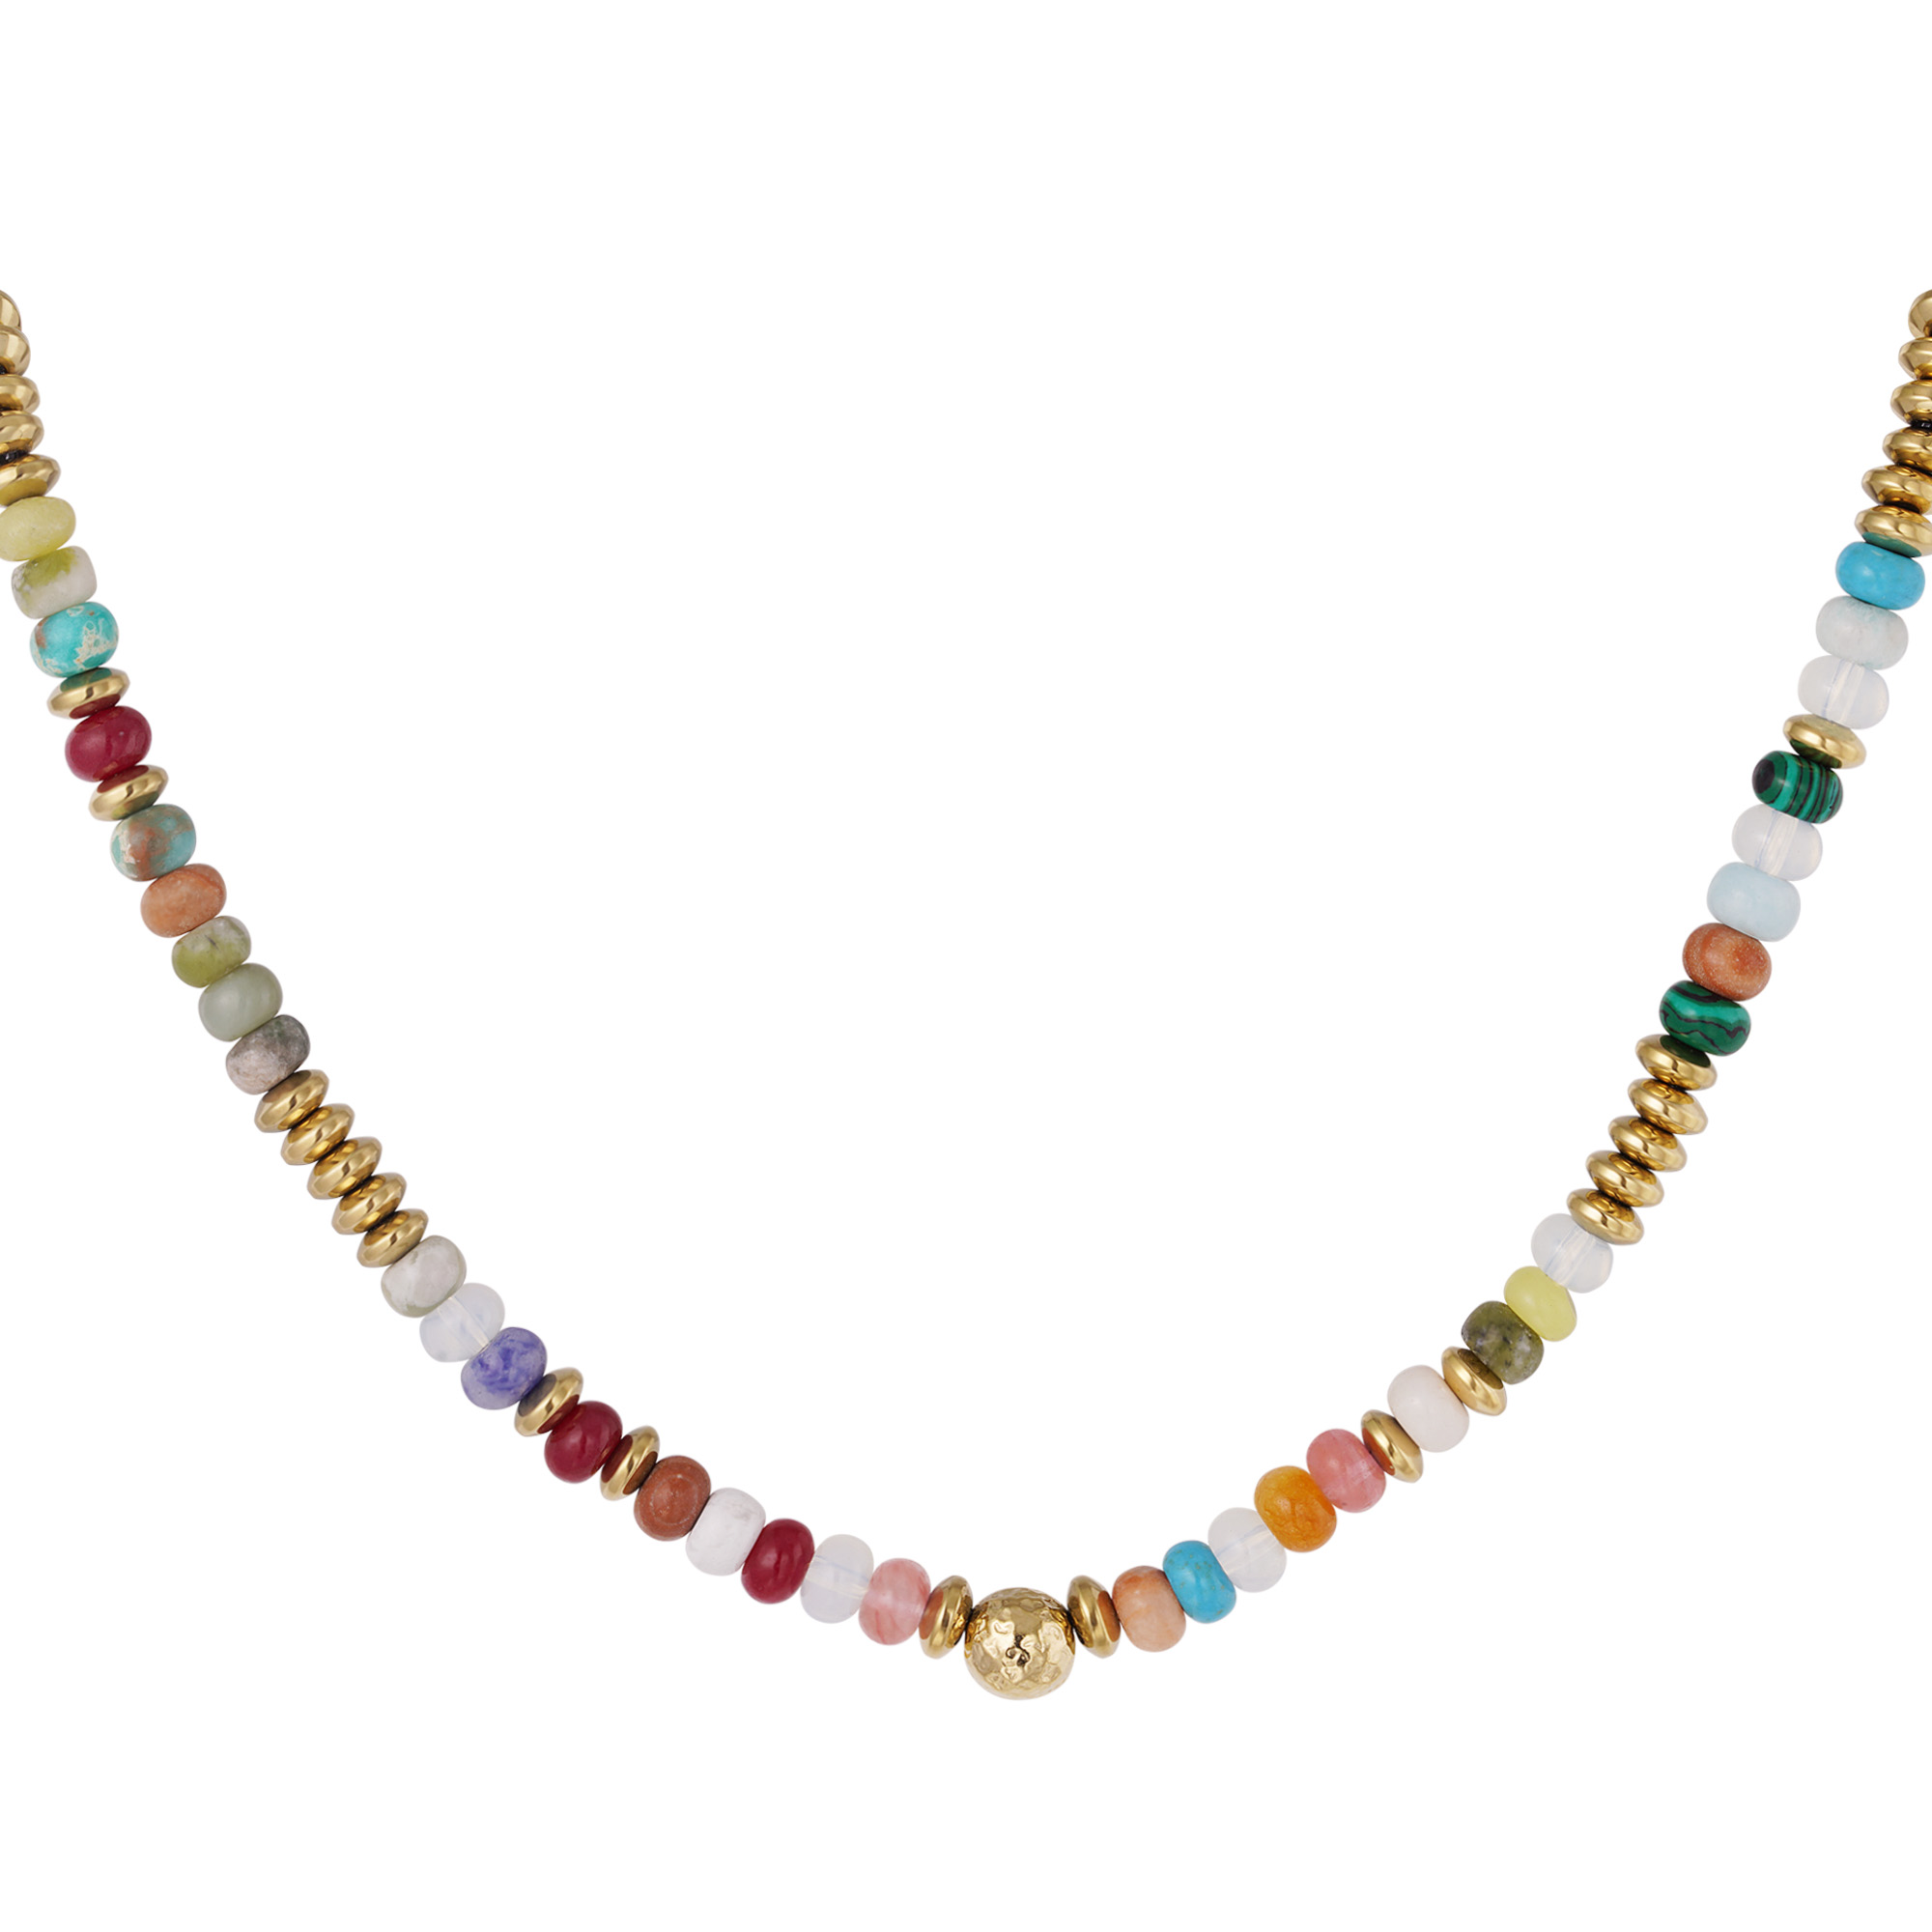 Necklace with multi-colored stone beads